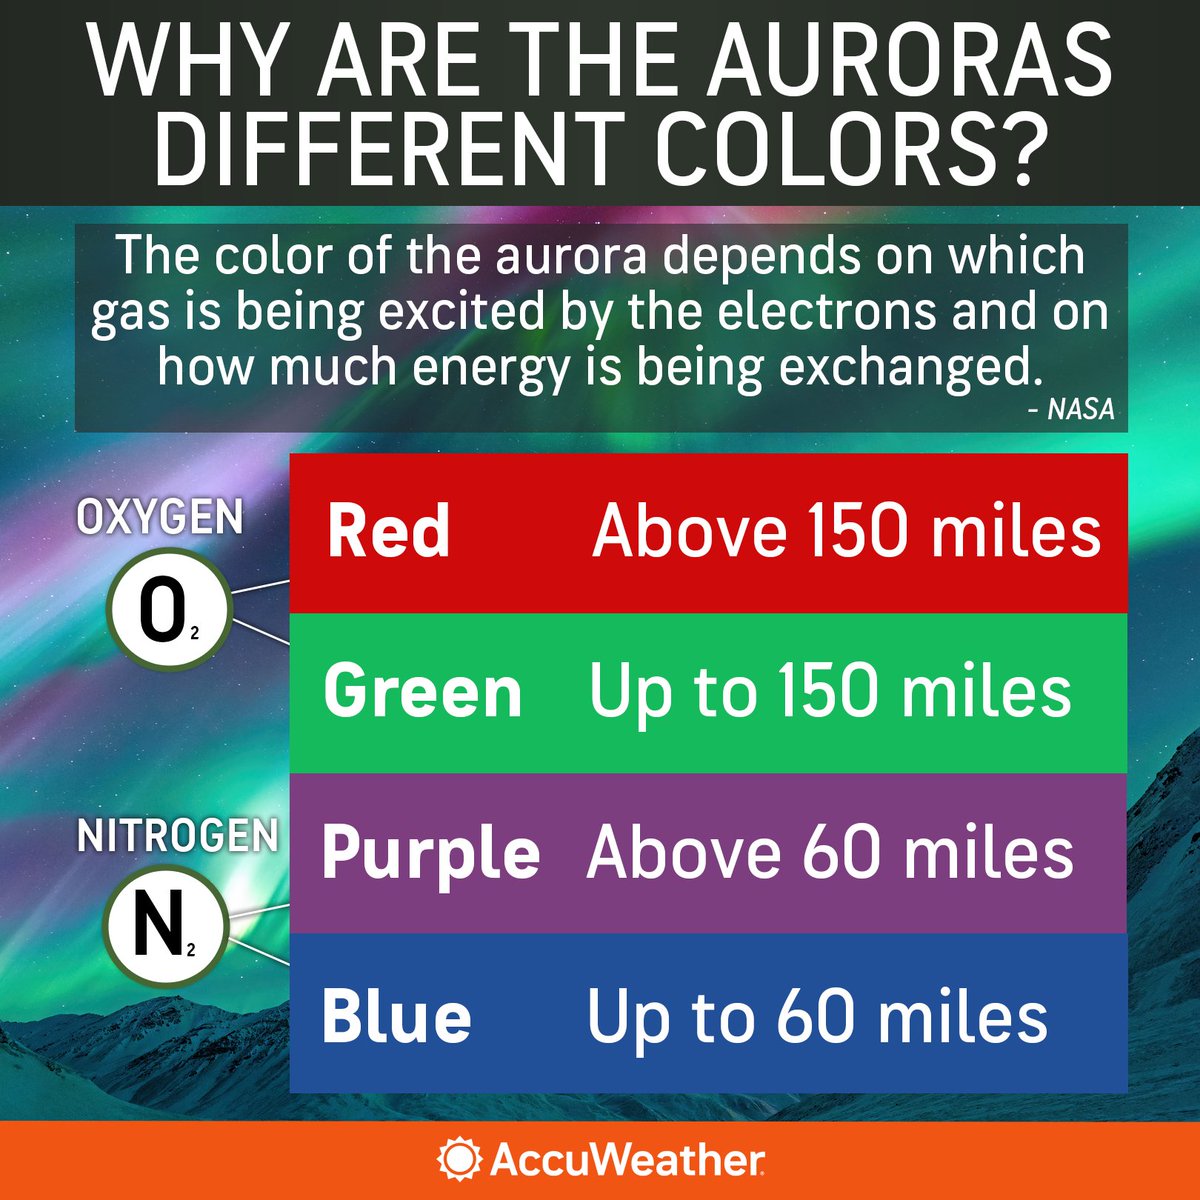 The Aurora Borealis can glow in multiple colors as it dances overhead, but have you wondered what causes the different colors?

Here's the colorful science behind the Northern Lights. bit.ly/4bq6b93